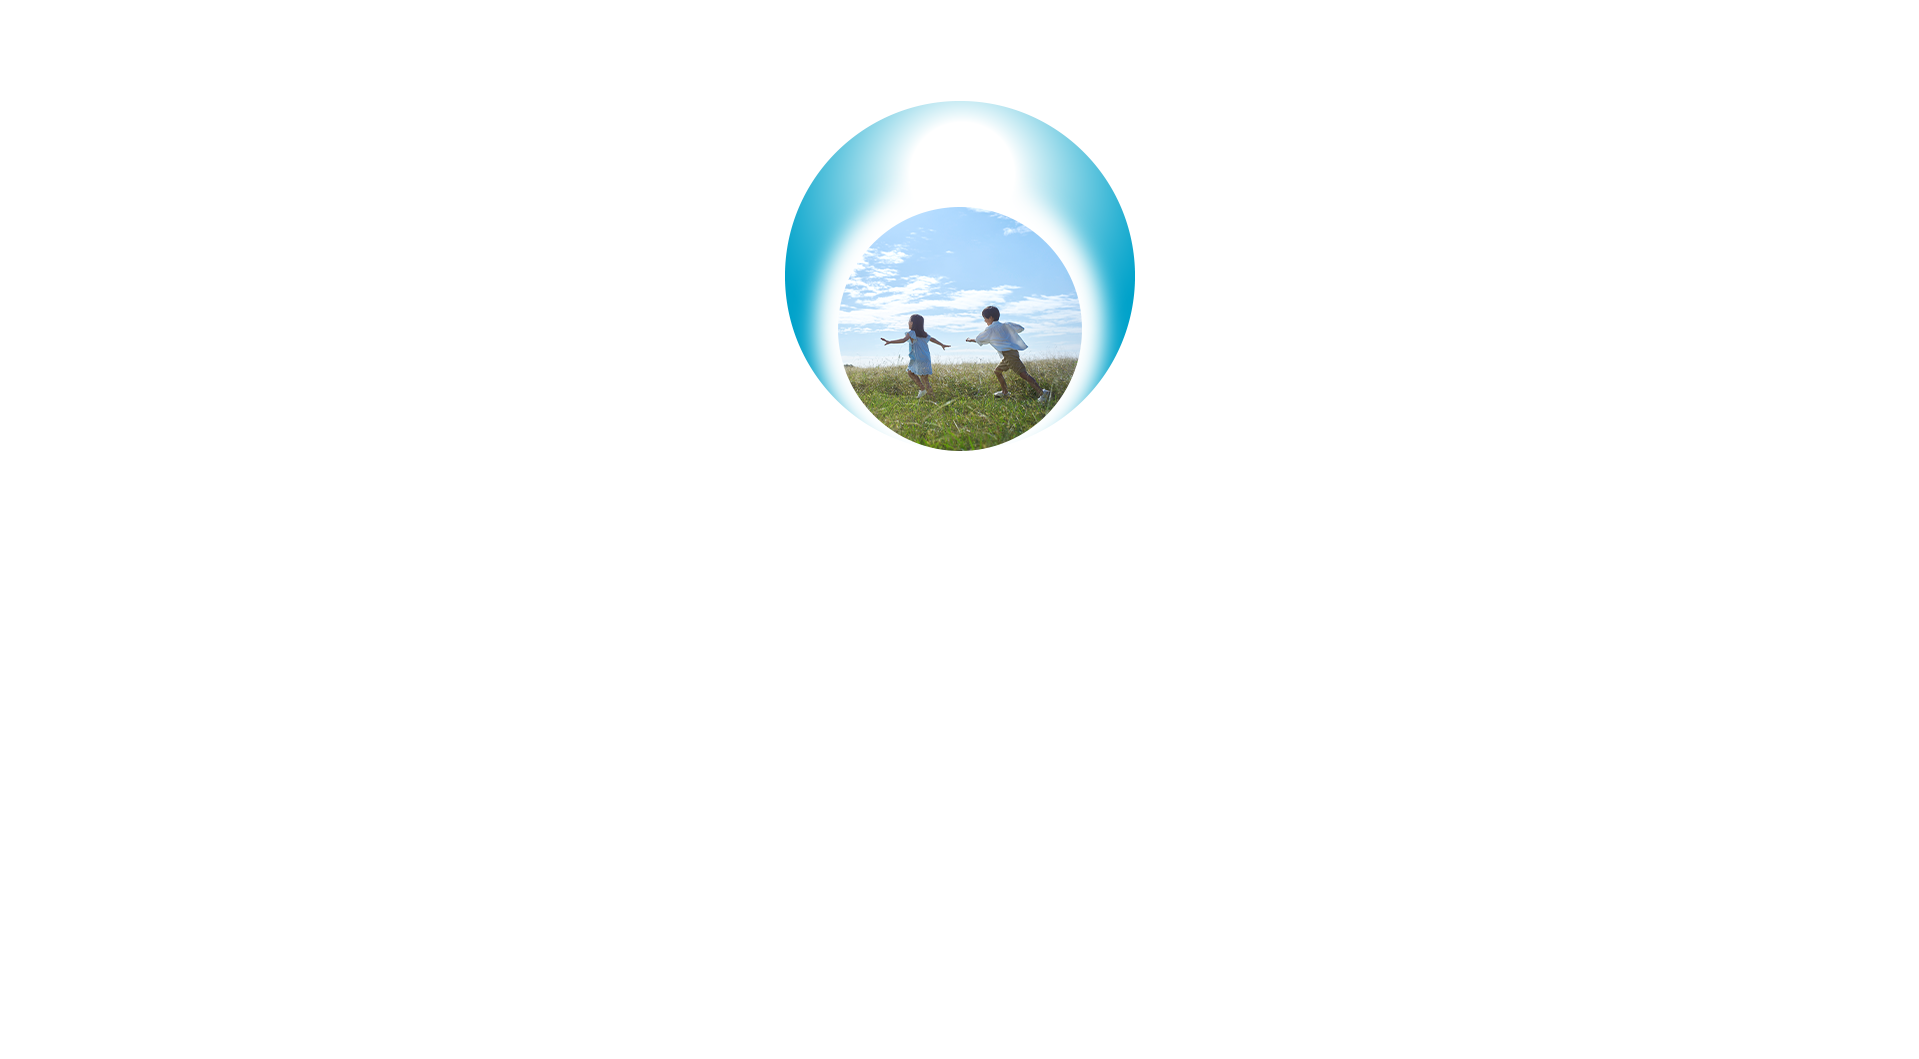 For the People